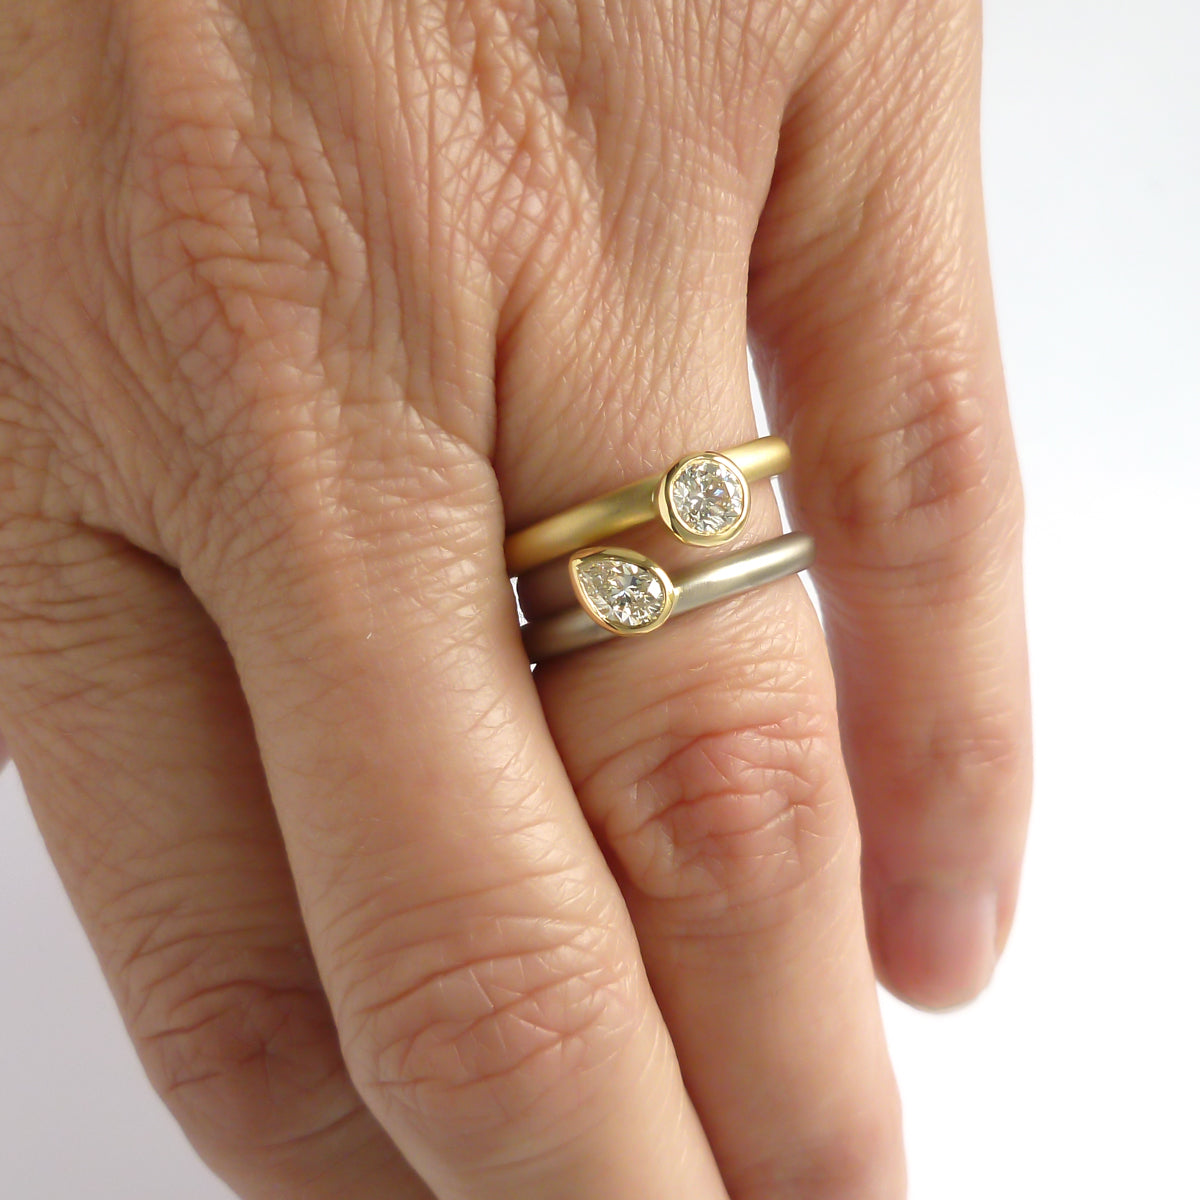 Contemporary 18ct gold and platinum engagement wedding ring, unique, bespoke and modern - handmade by Sue Lane.